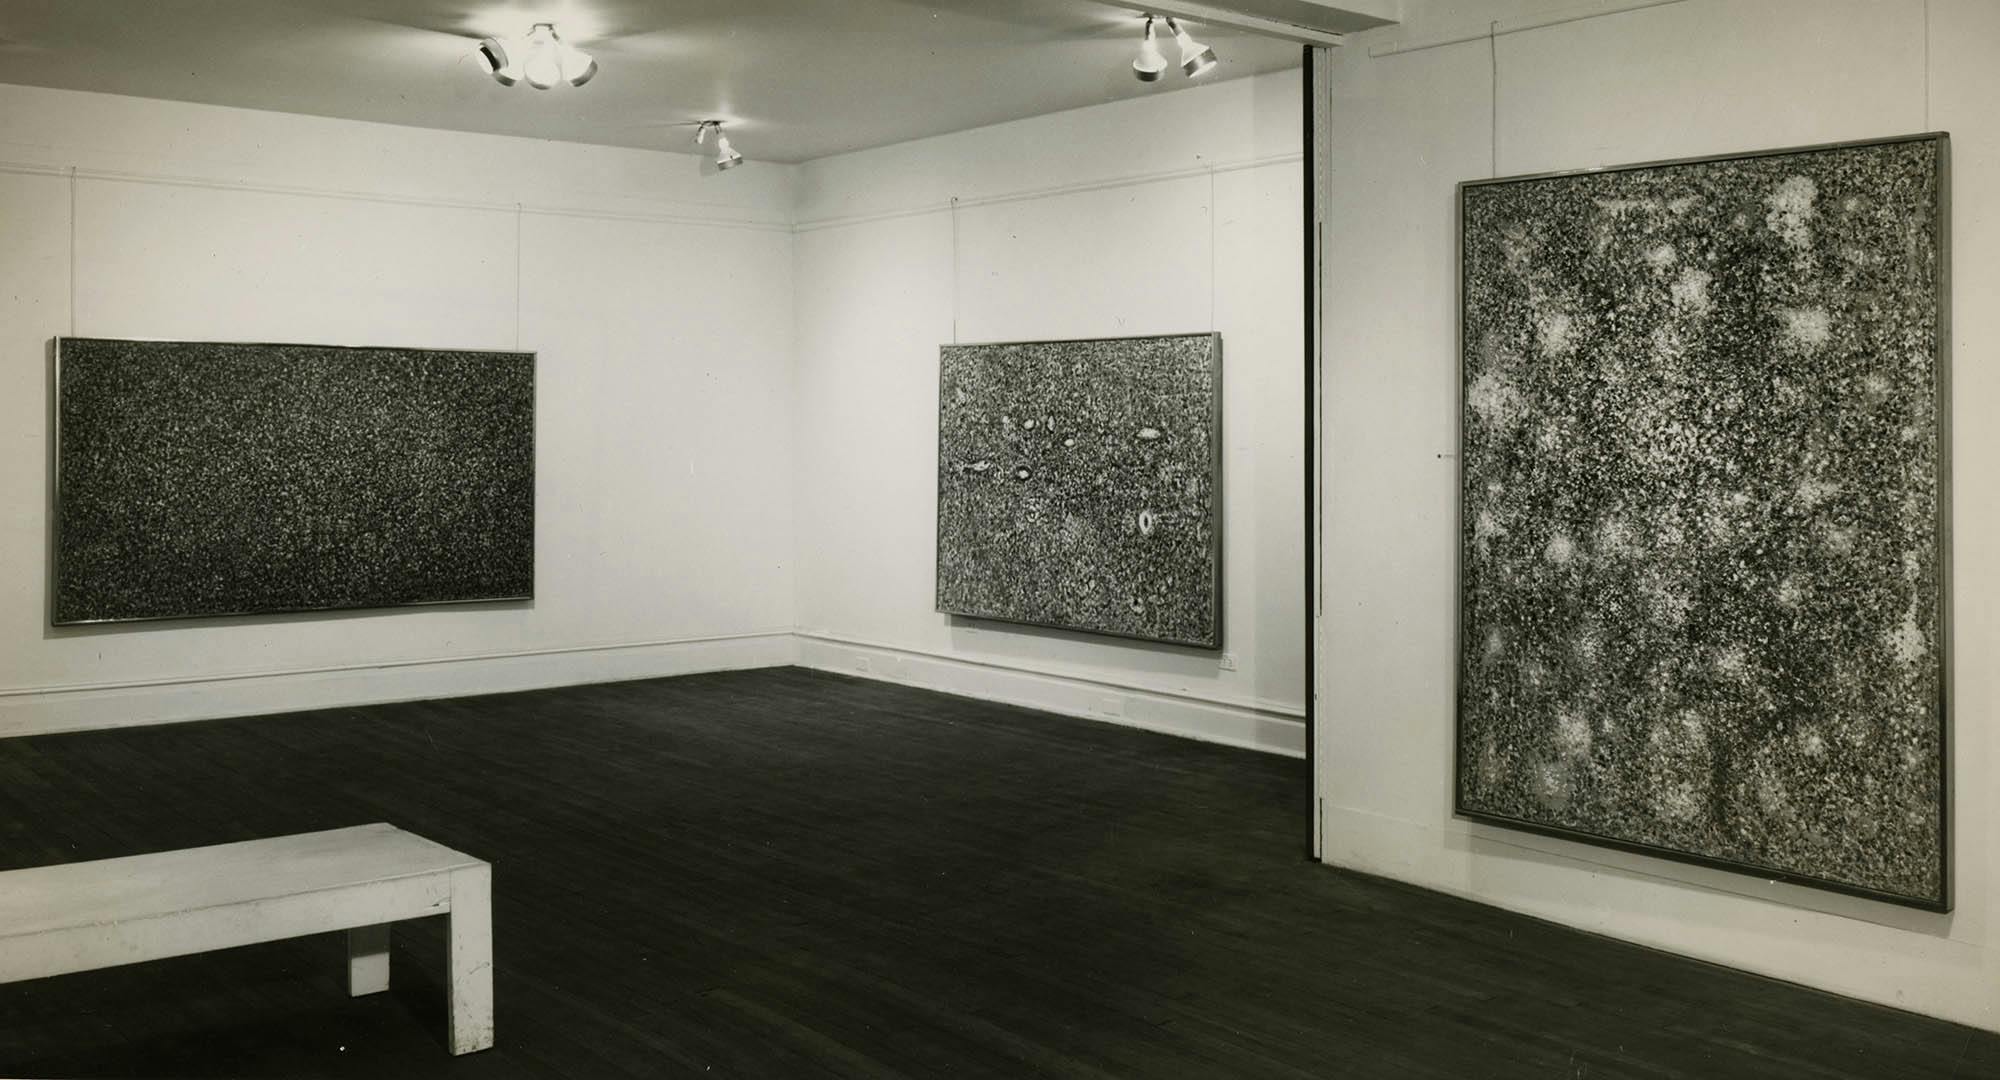 Installation view, Richard Pousette-Dart: Paintings, Betty Parsons Gallery, New York, NY, 1961. – The Richard Pousette-Dart Foundation